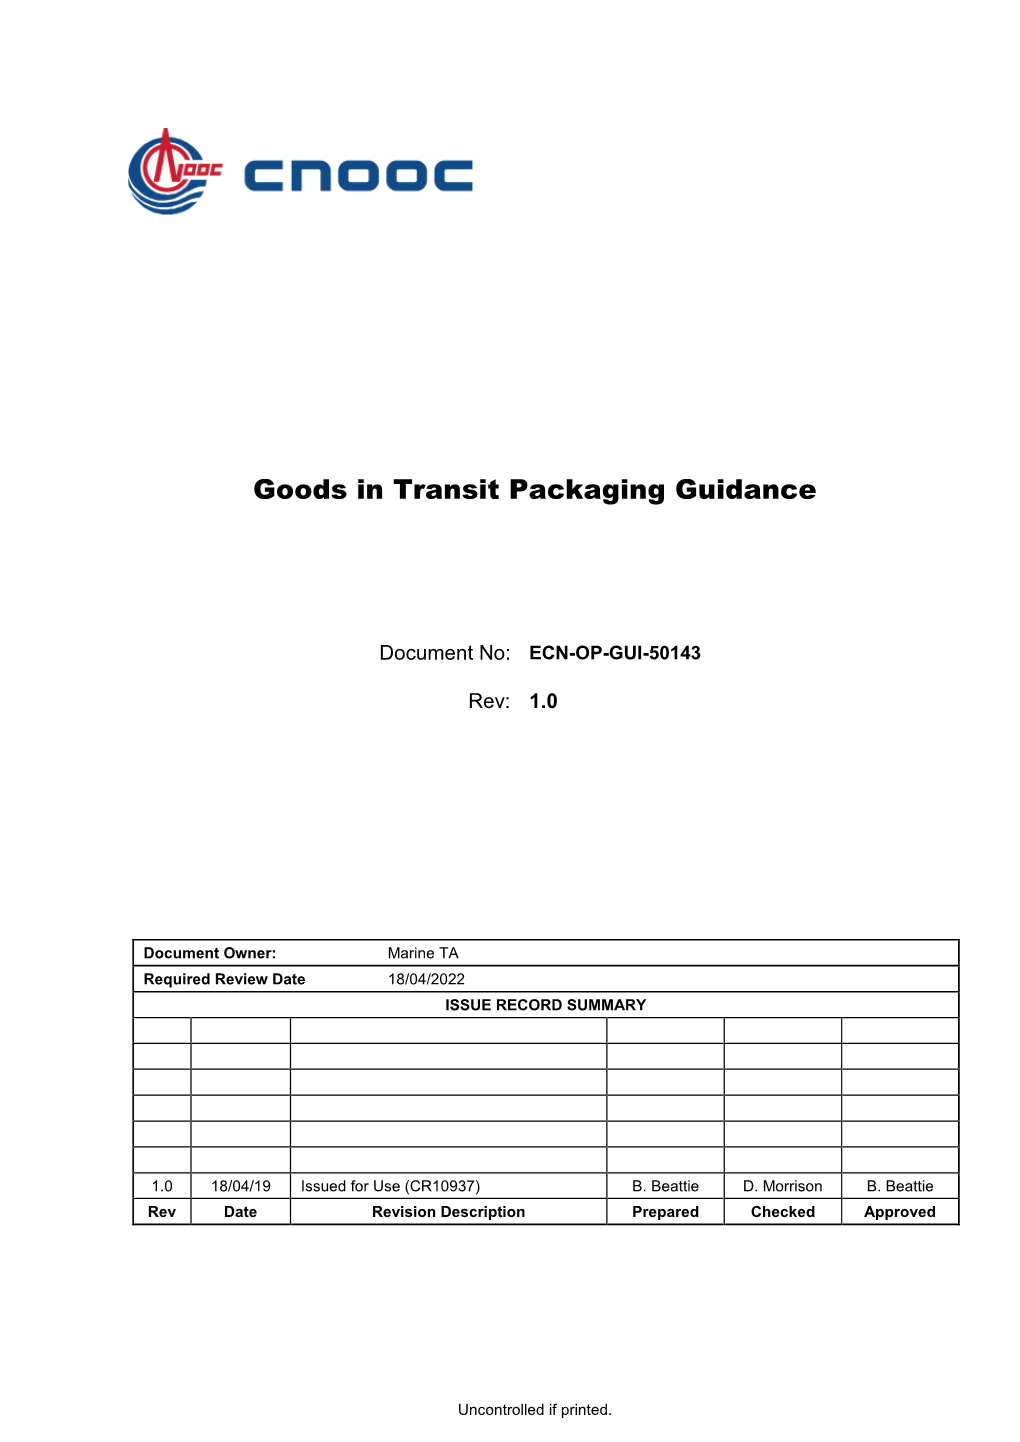 Goods in Transit Packaging Guidance